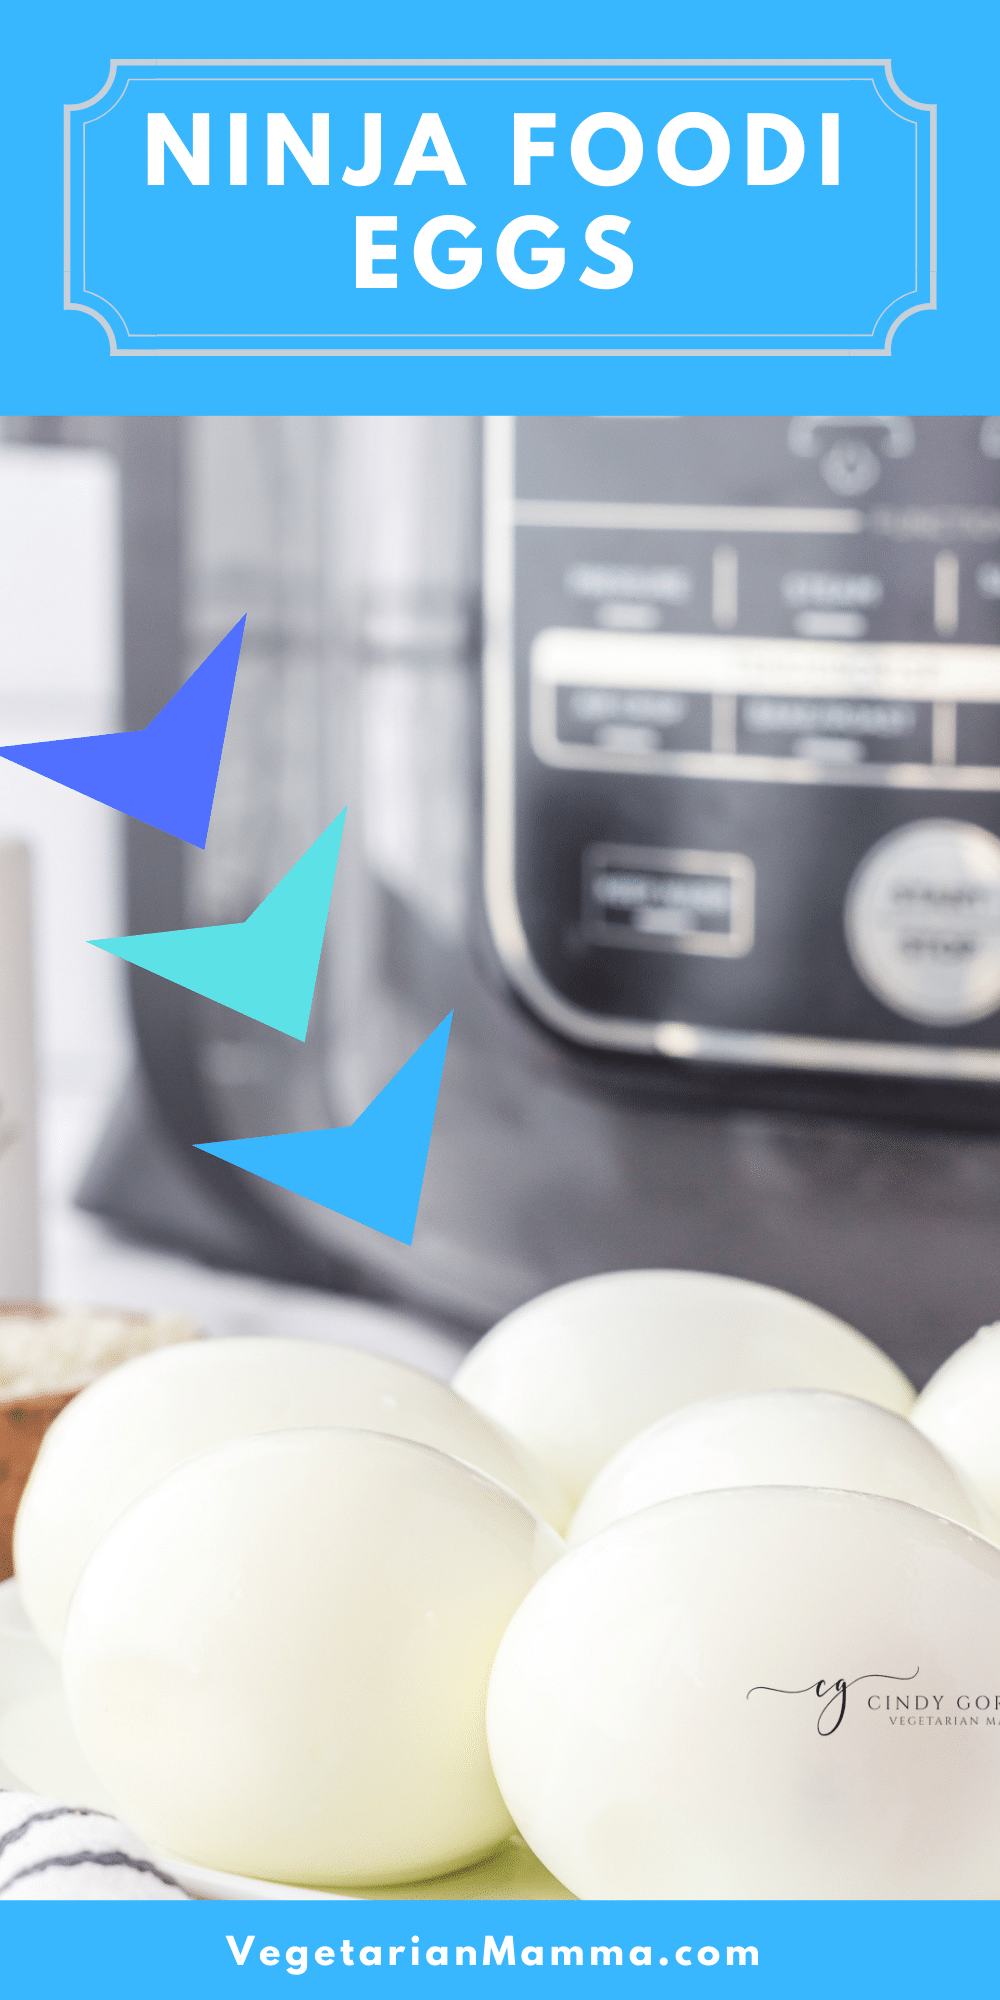 Nore more guessing how to make perfect hard boiled eggs in the pressure cooker! Ninja Foodi Hard Boiled eggs are a vegetarian staple that is easy to make for breakfast, lunch, and dinner.